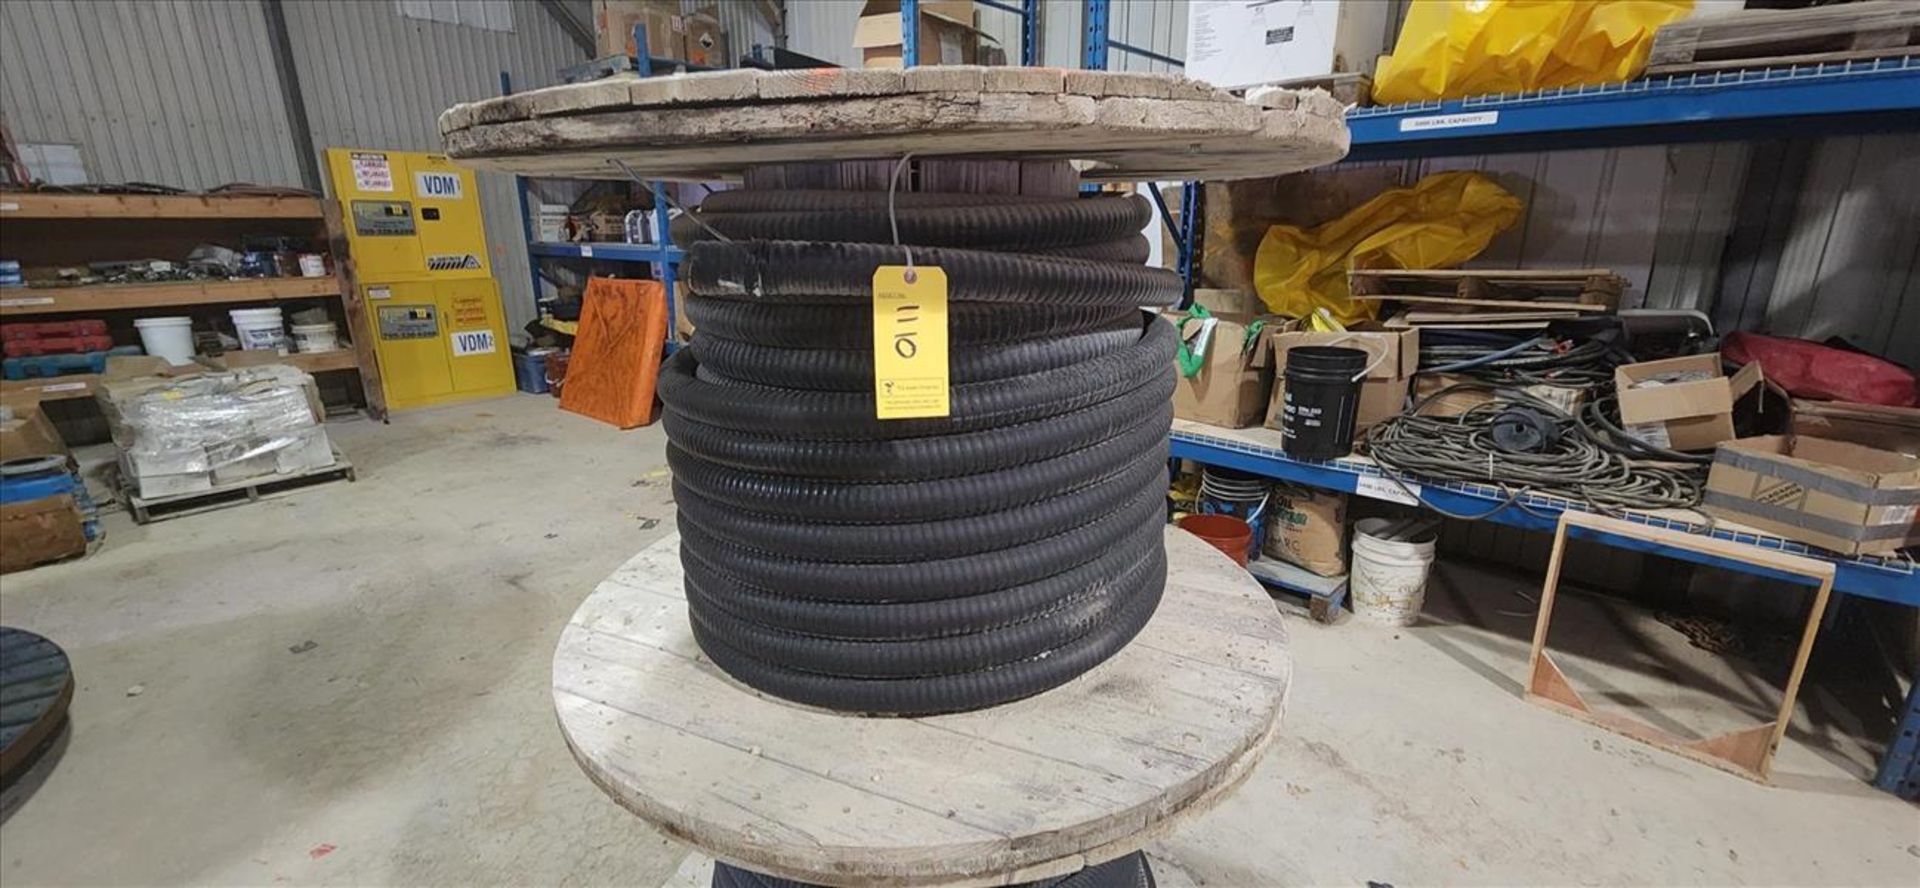 partial reel of electrical cable: GENERAL CABLE MI ACID-FLAME-CHECK AG14 FT1 HL TECK90 XLPE -40C 4/C